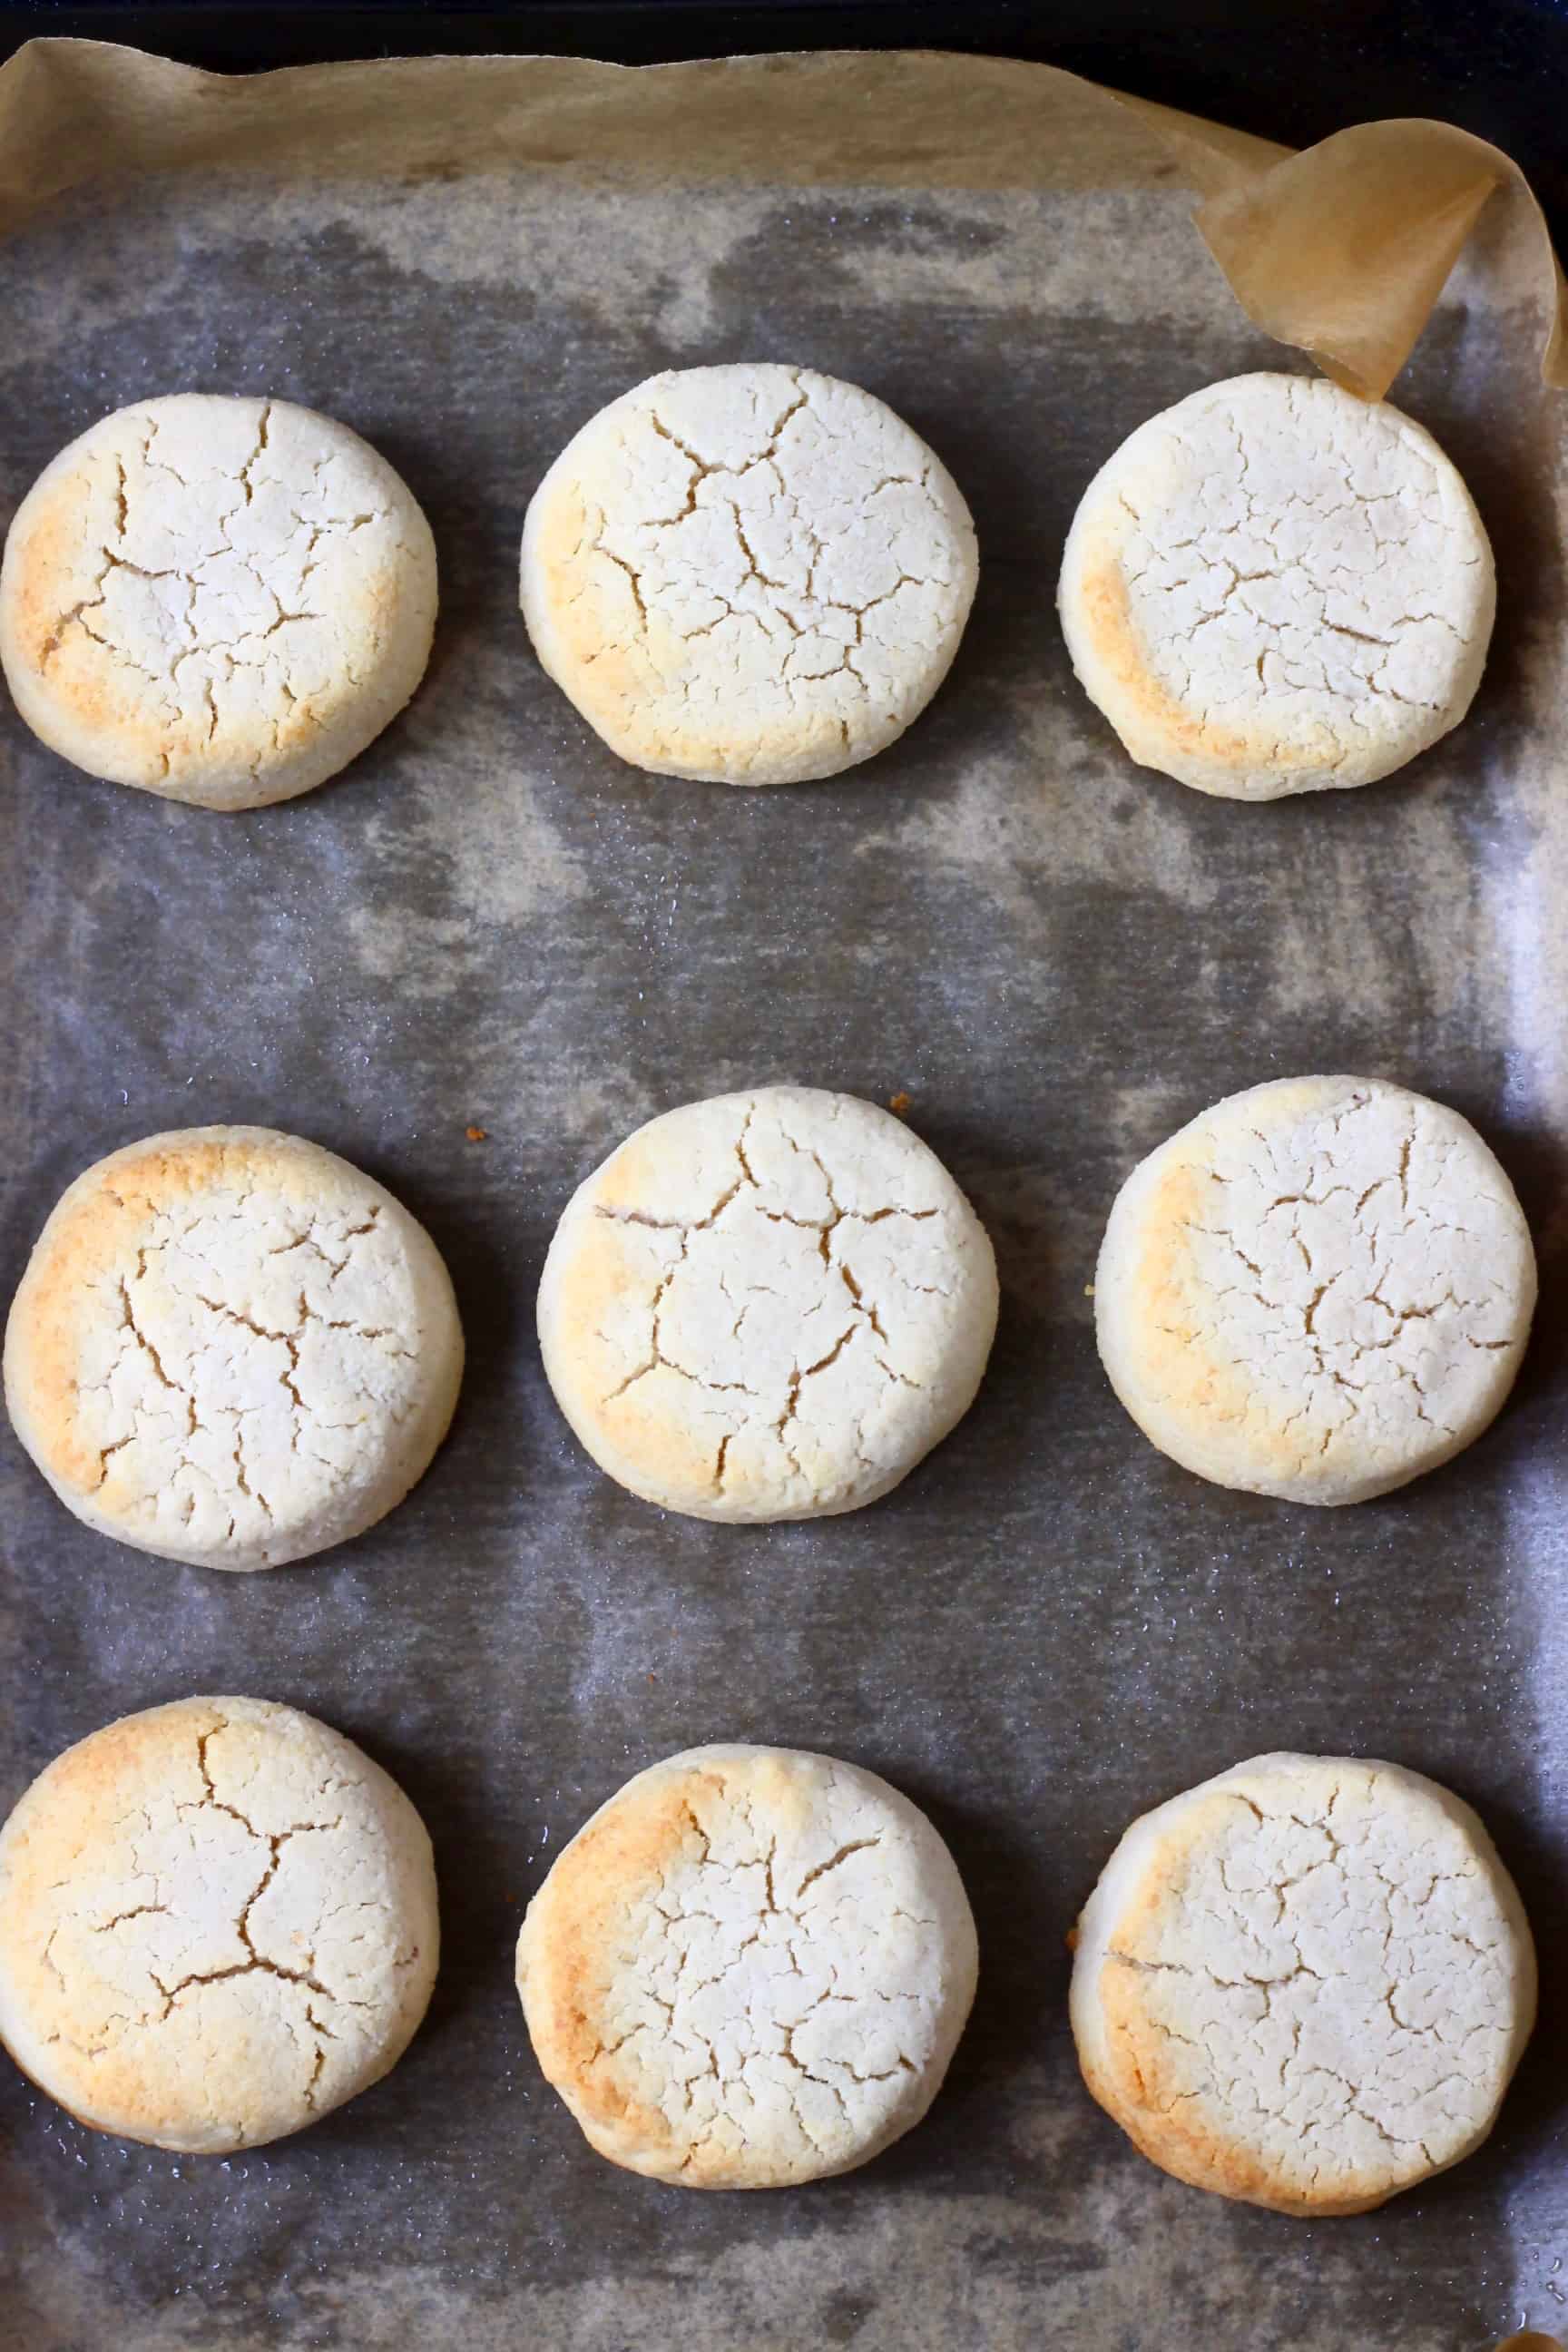 Nine gluten-free vegan scones on a baking tray lined with baking paper